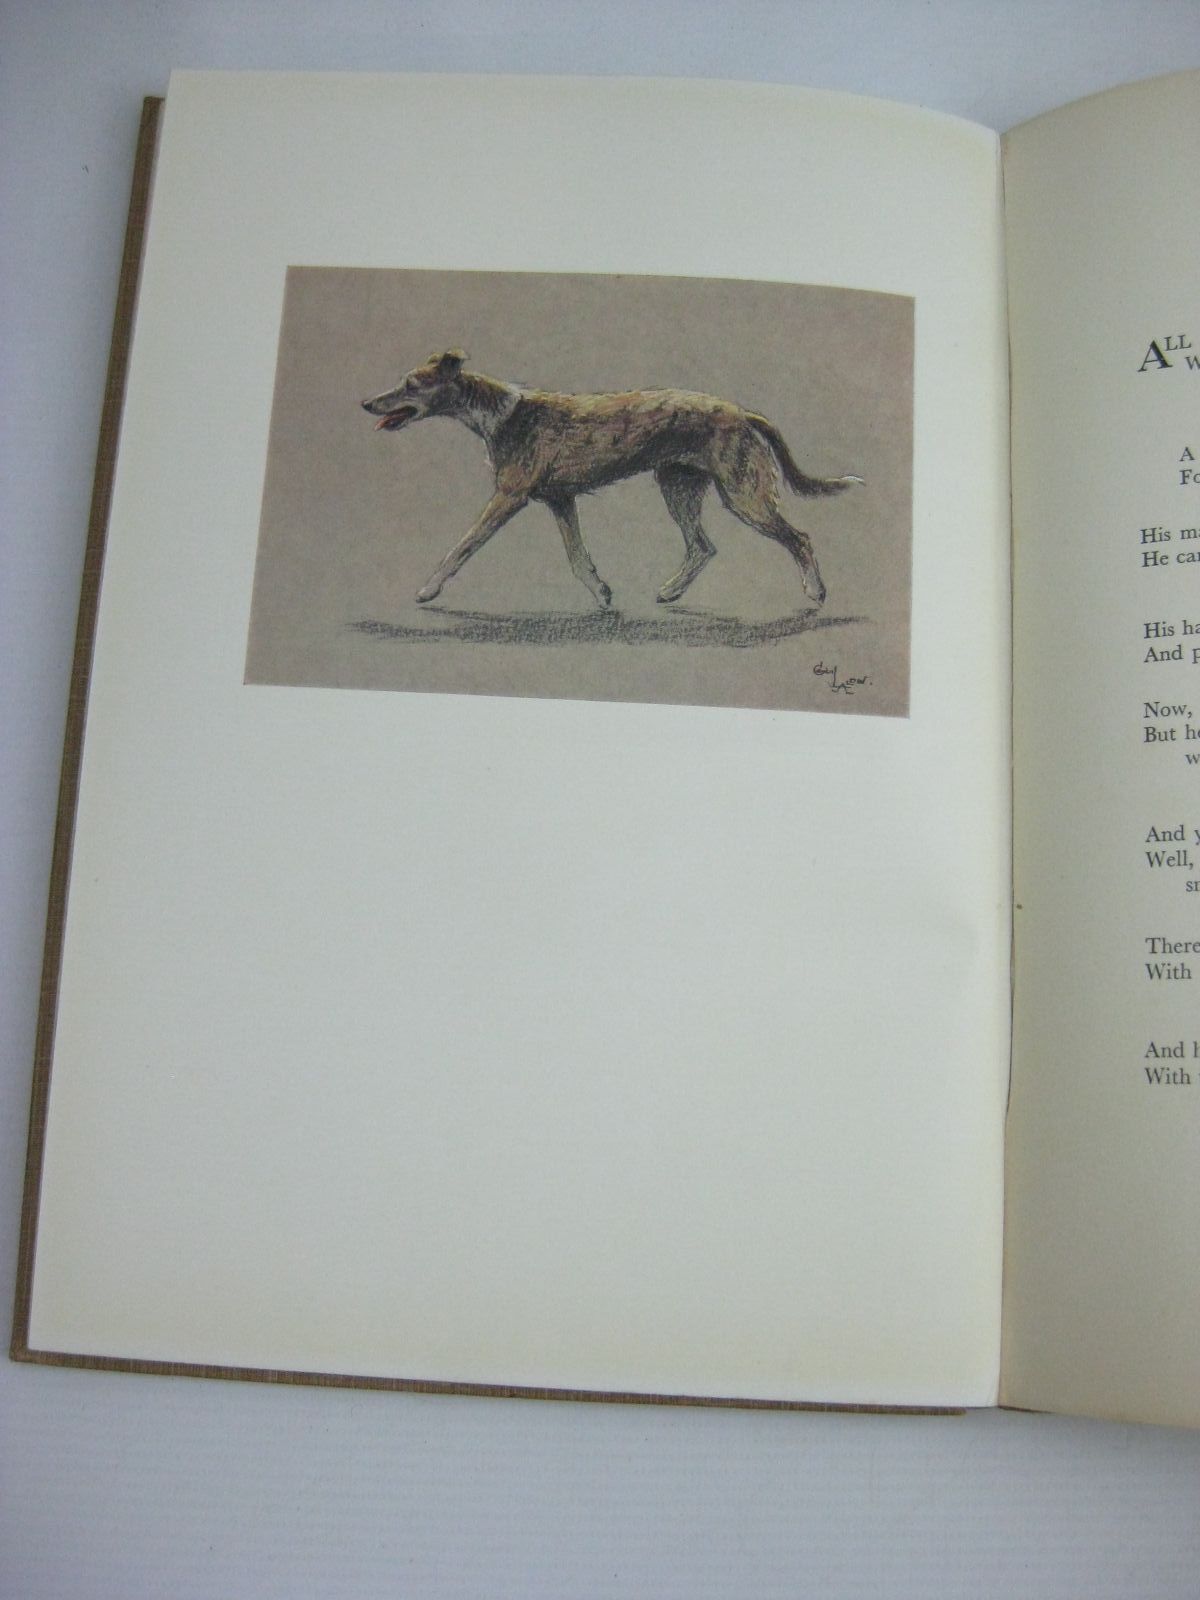 Photo of A DOZEN DOGS OR SO written by Chalmers, Patrick R. illustrated by Aldin, Cecil published by Eyre & Spottiswoode (STOCK CODE: 1506026)  for sale by Stella & Rose's Books